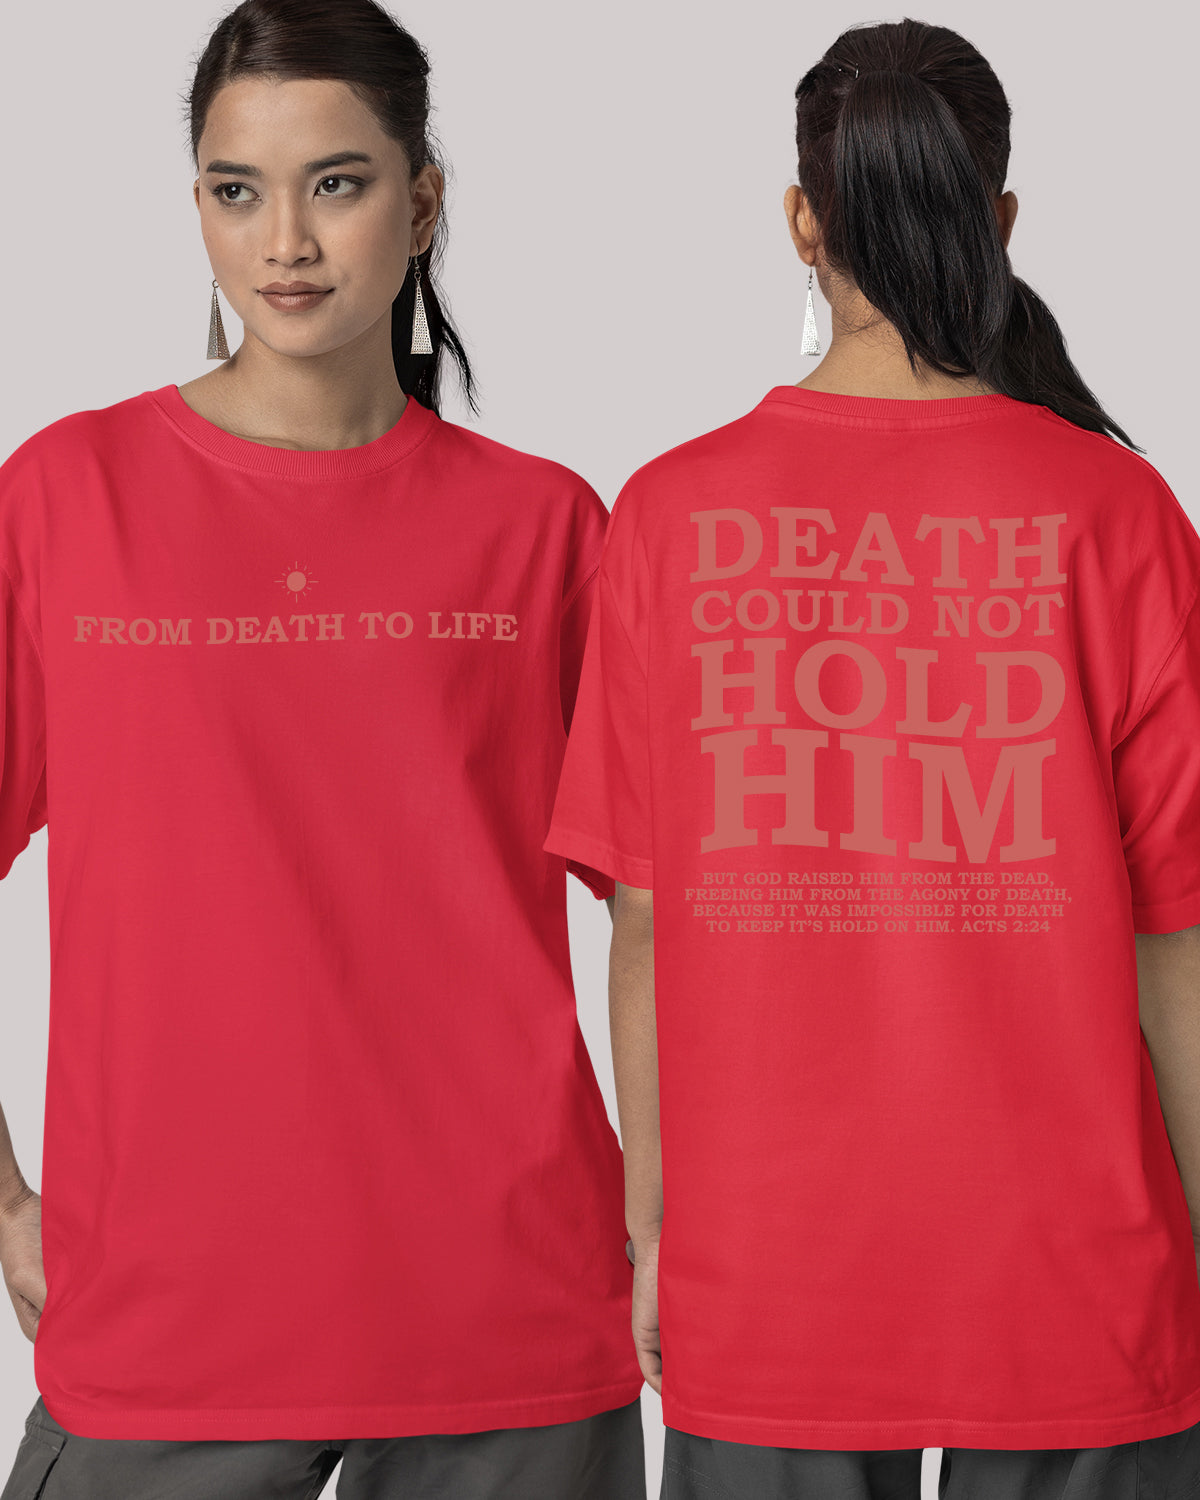 Death Could Not Hold Him Bible Verse From Death To Life Christian Front Back T Shirt